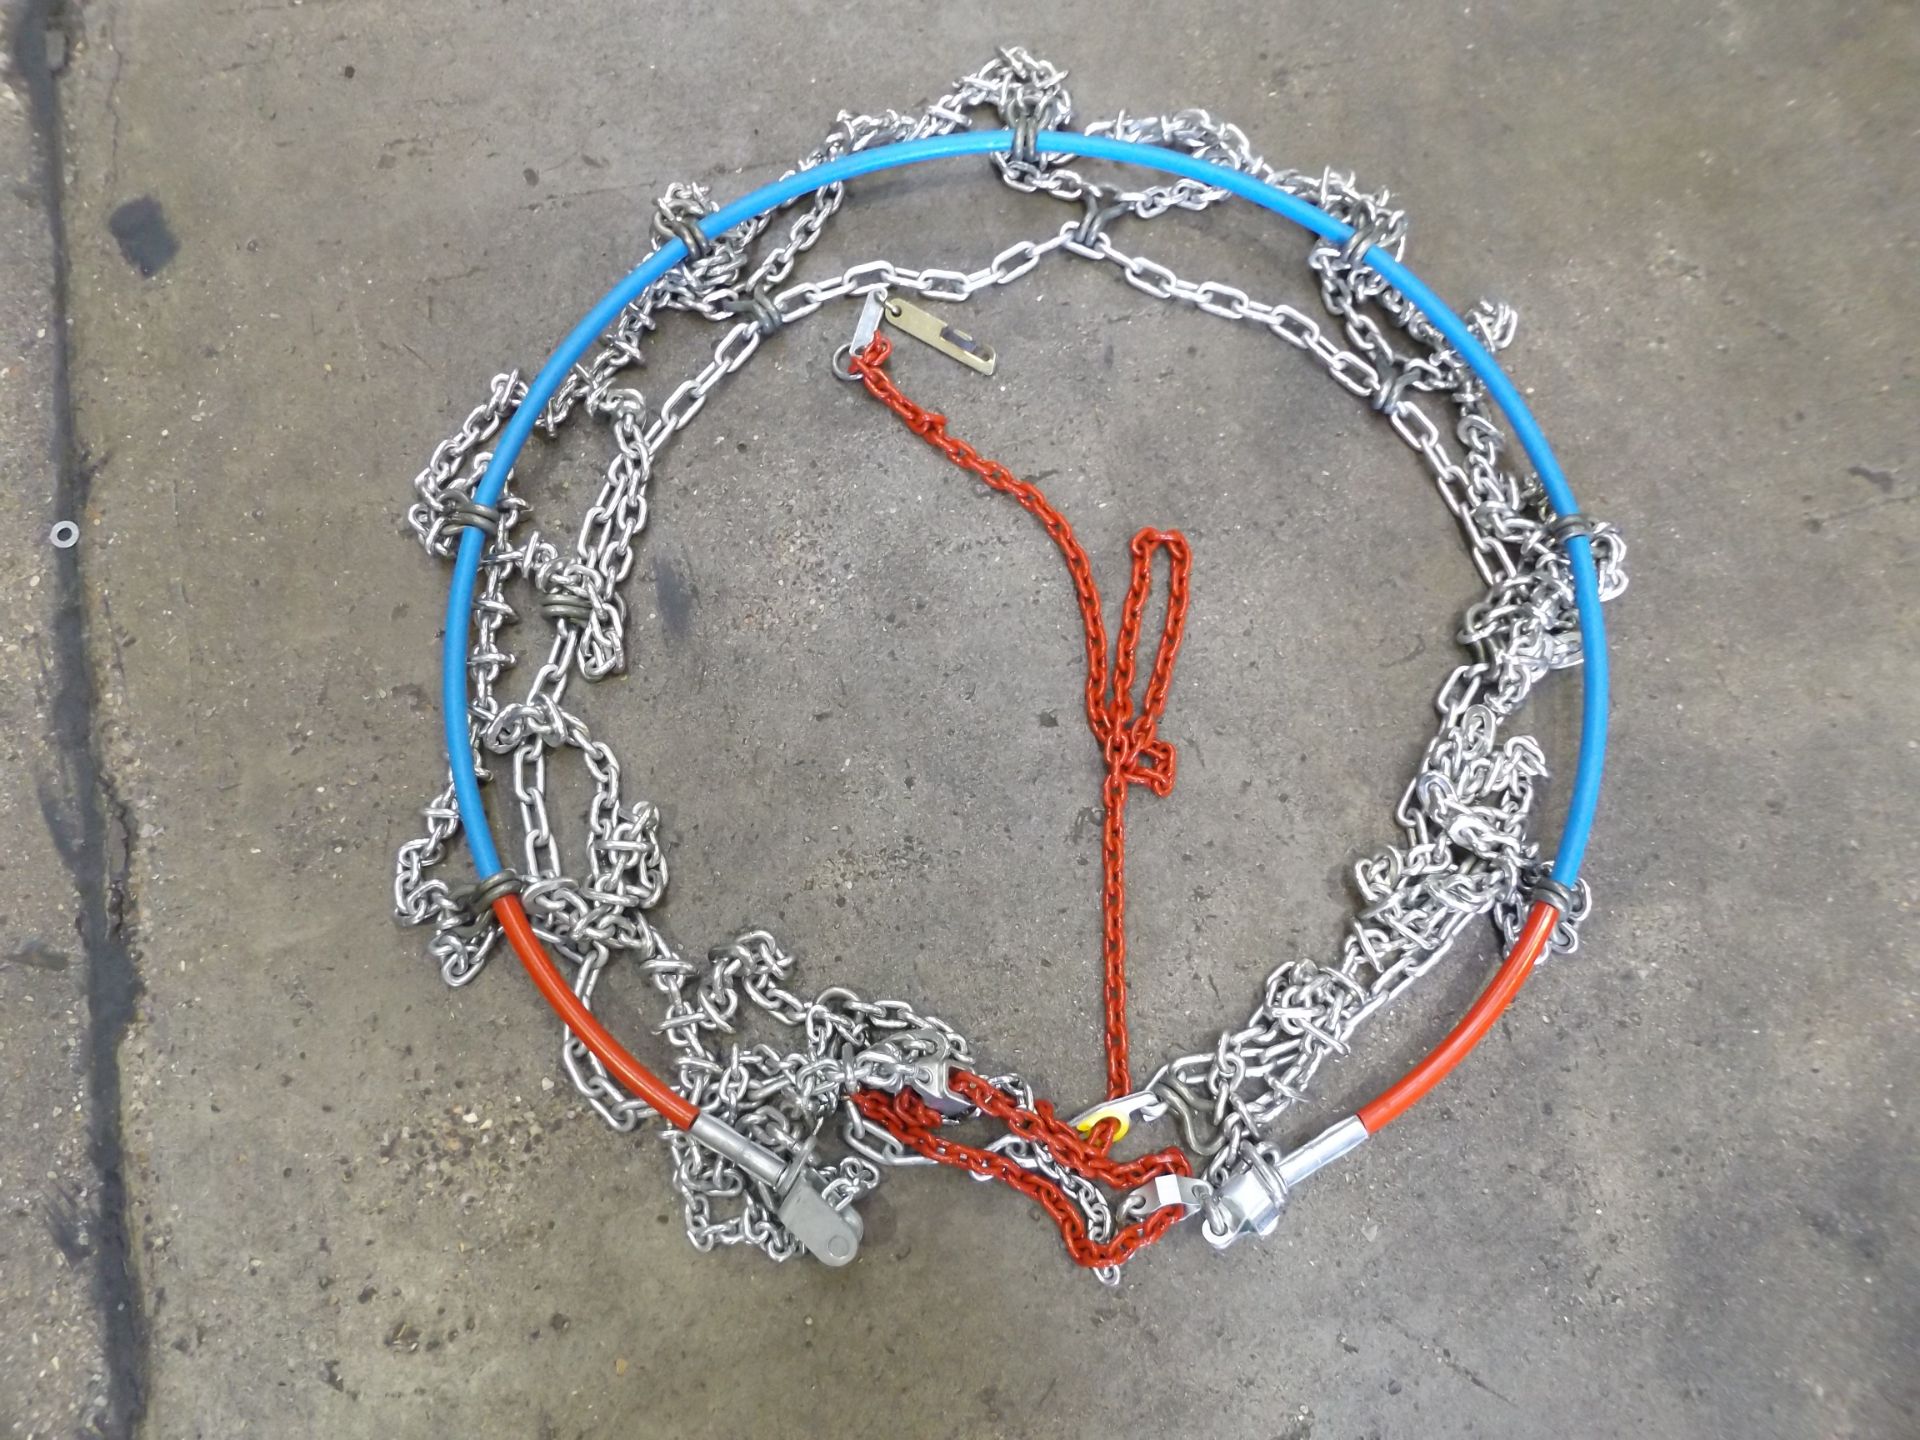 4 x heavy duty extra Grip Rud Matic Snow Chains - Image 2 of 4